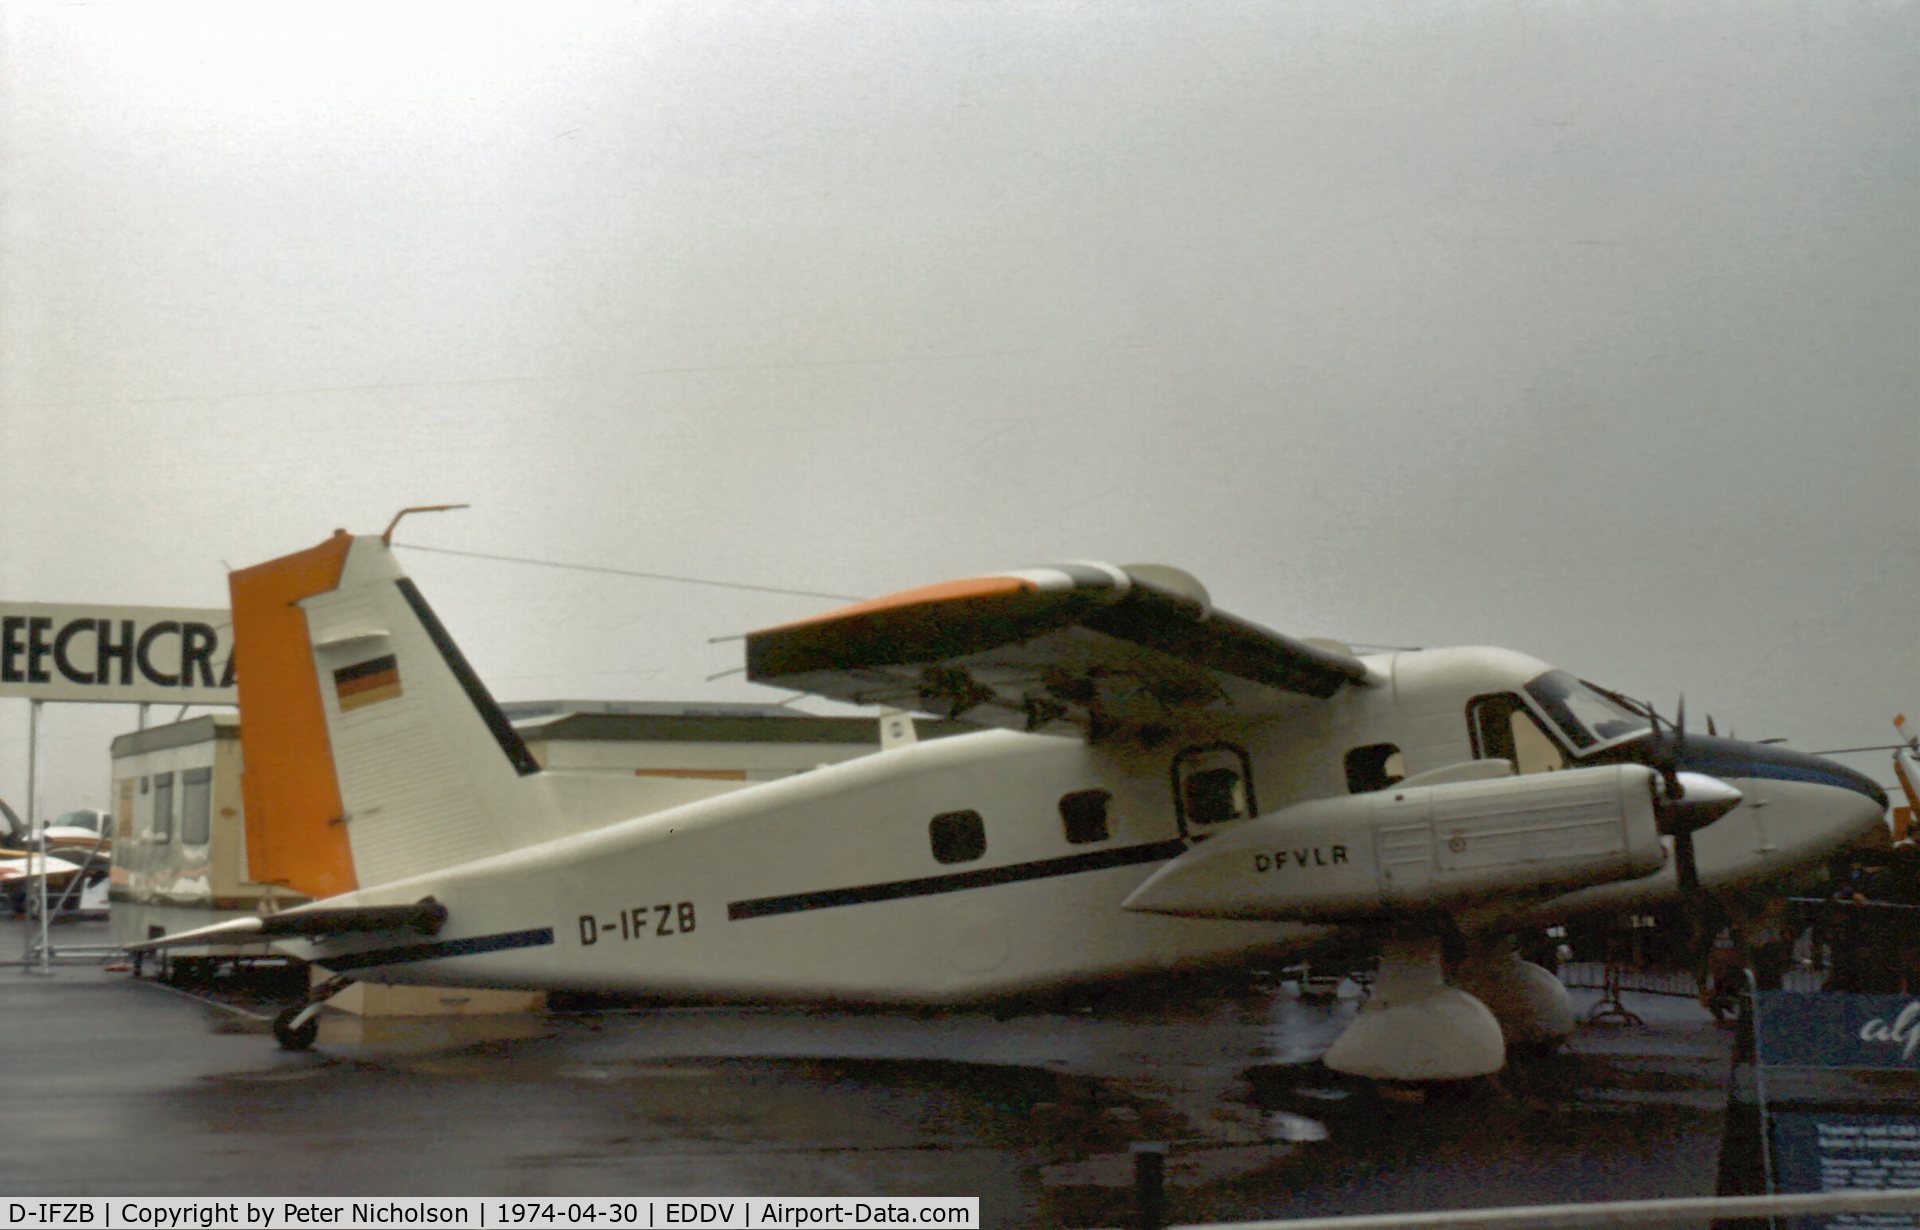 D-IFZB, 1974 Dornier Do-28D-1 Skyservant C/N 4037, This Skyservant on display at the 1974 Hannover Airshow later saw Luftwaffe service as 41+02 and 58+02.